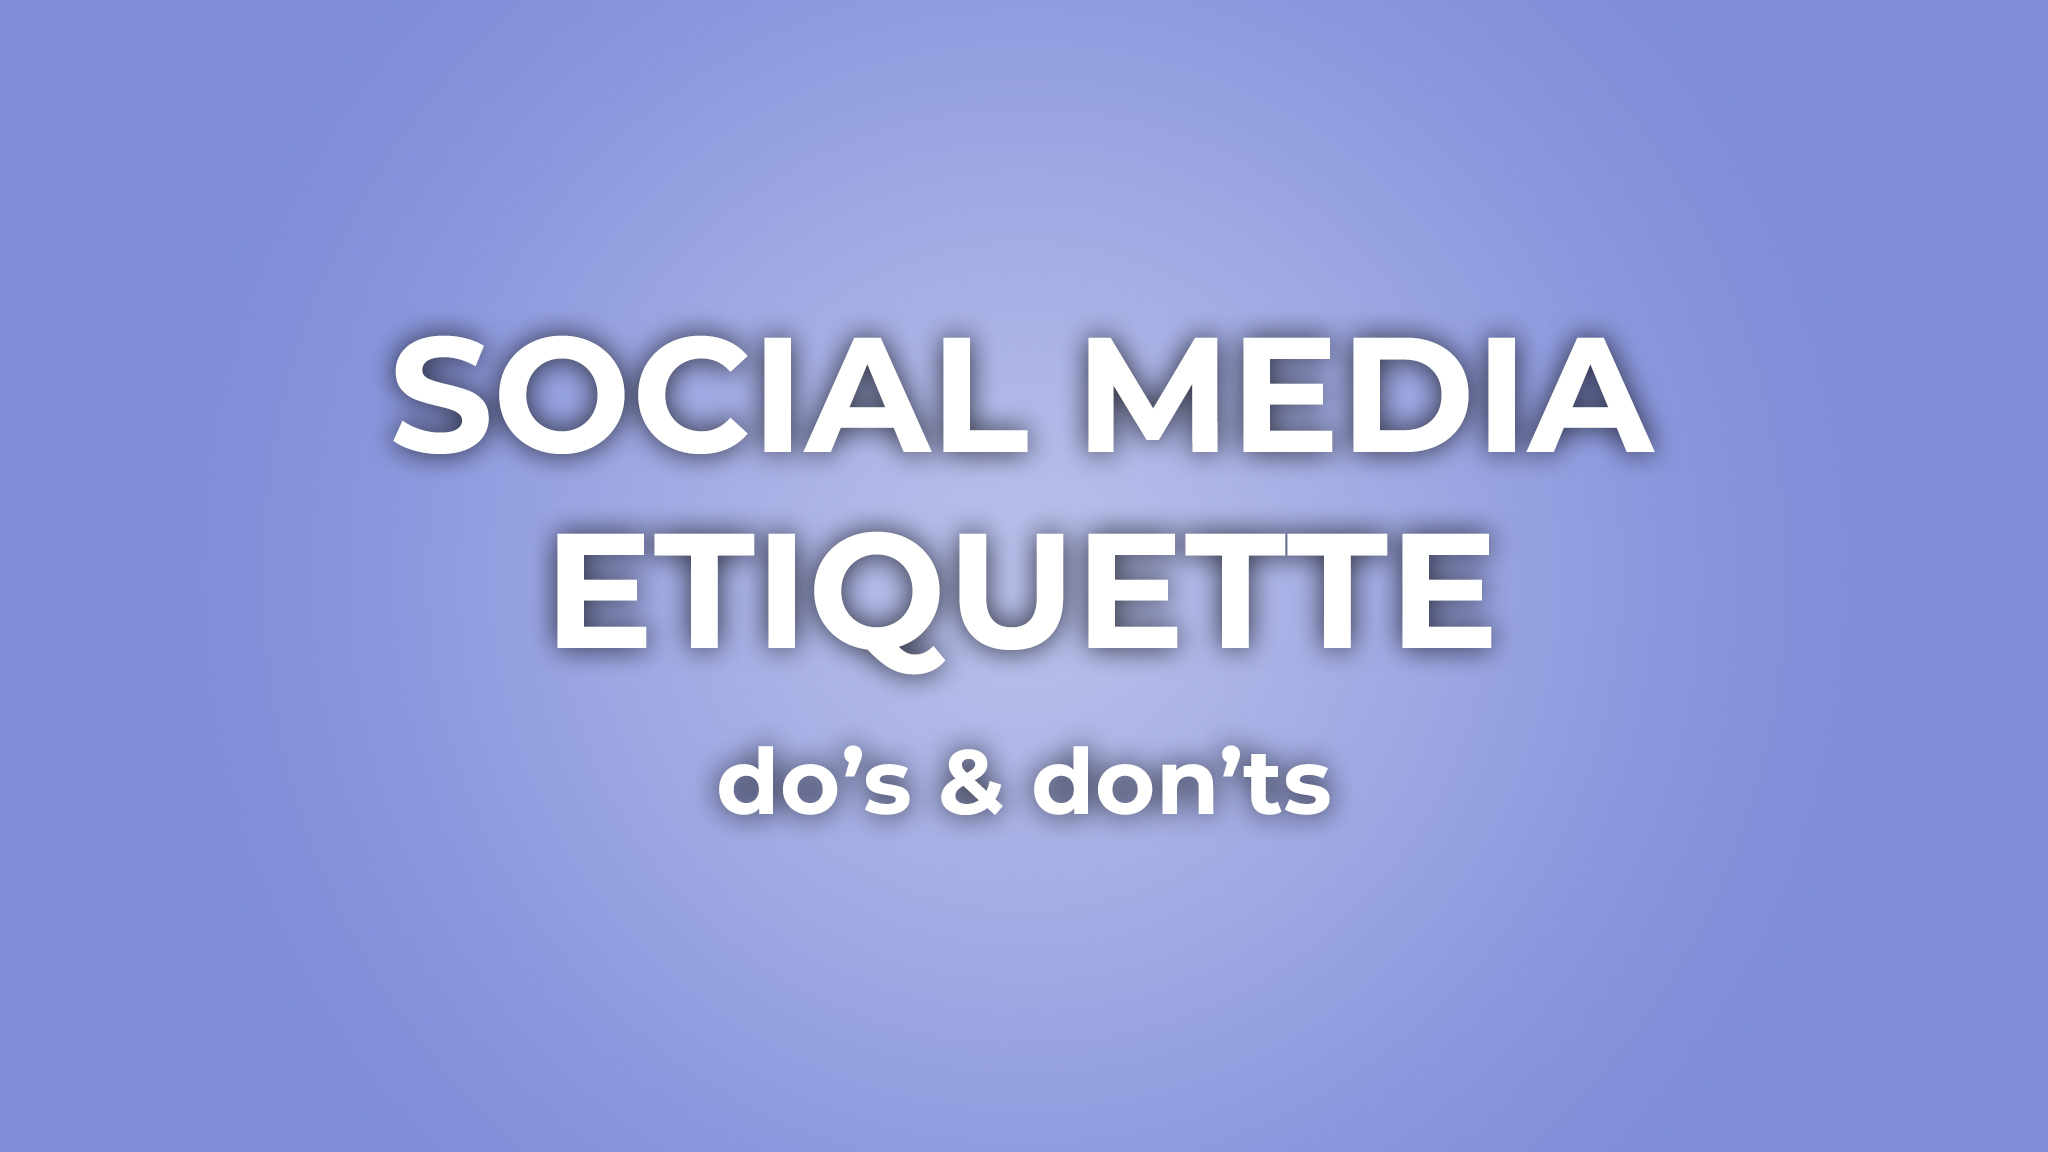 The Dos and Don'ts of Social Media Etiquette